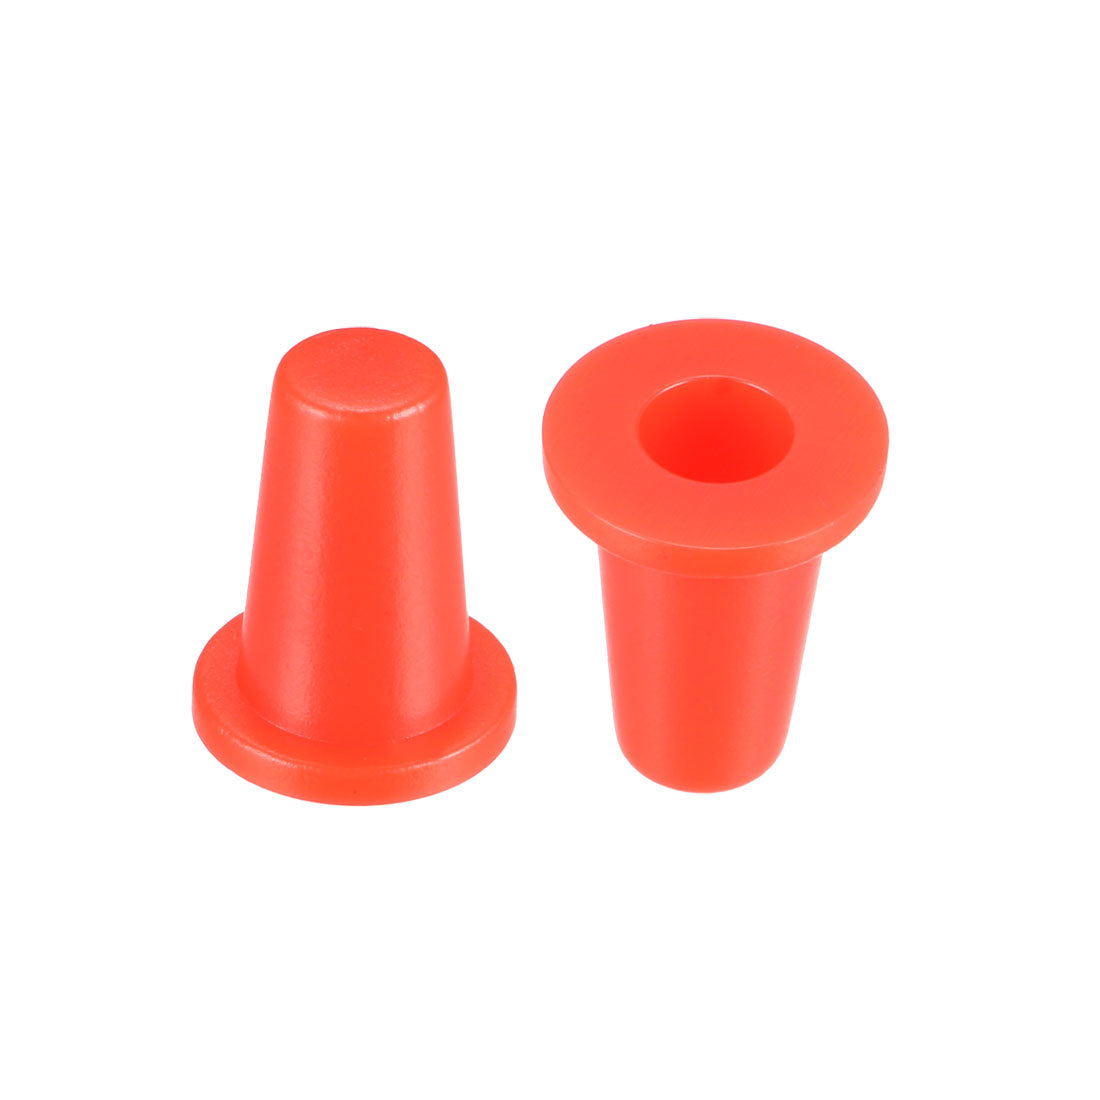 uxcell Uxcell 20Pcs 3.5mm Hole Dia Plastic Push Button Tactile Switch Caps Cover Keycaps Protector Red for 6x6 Micro Switch